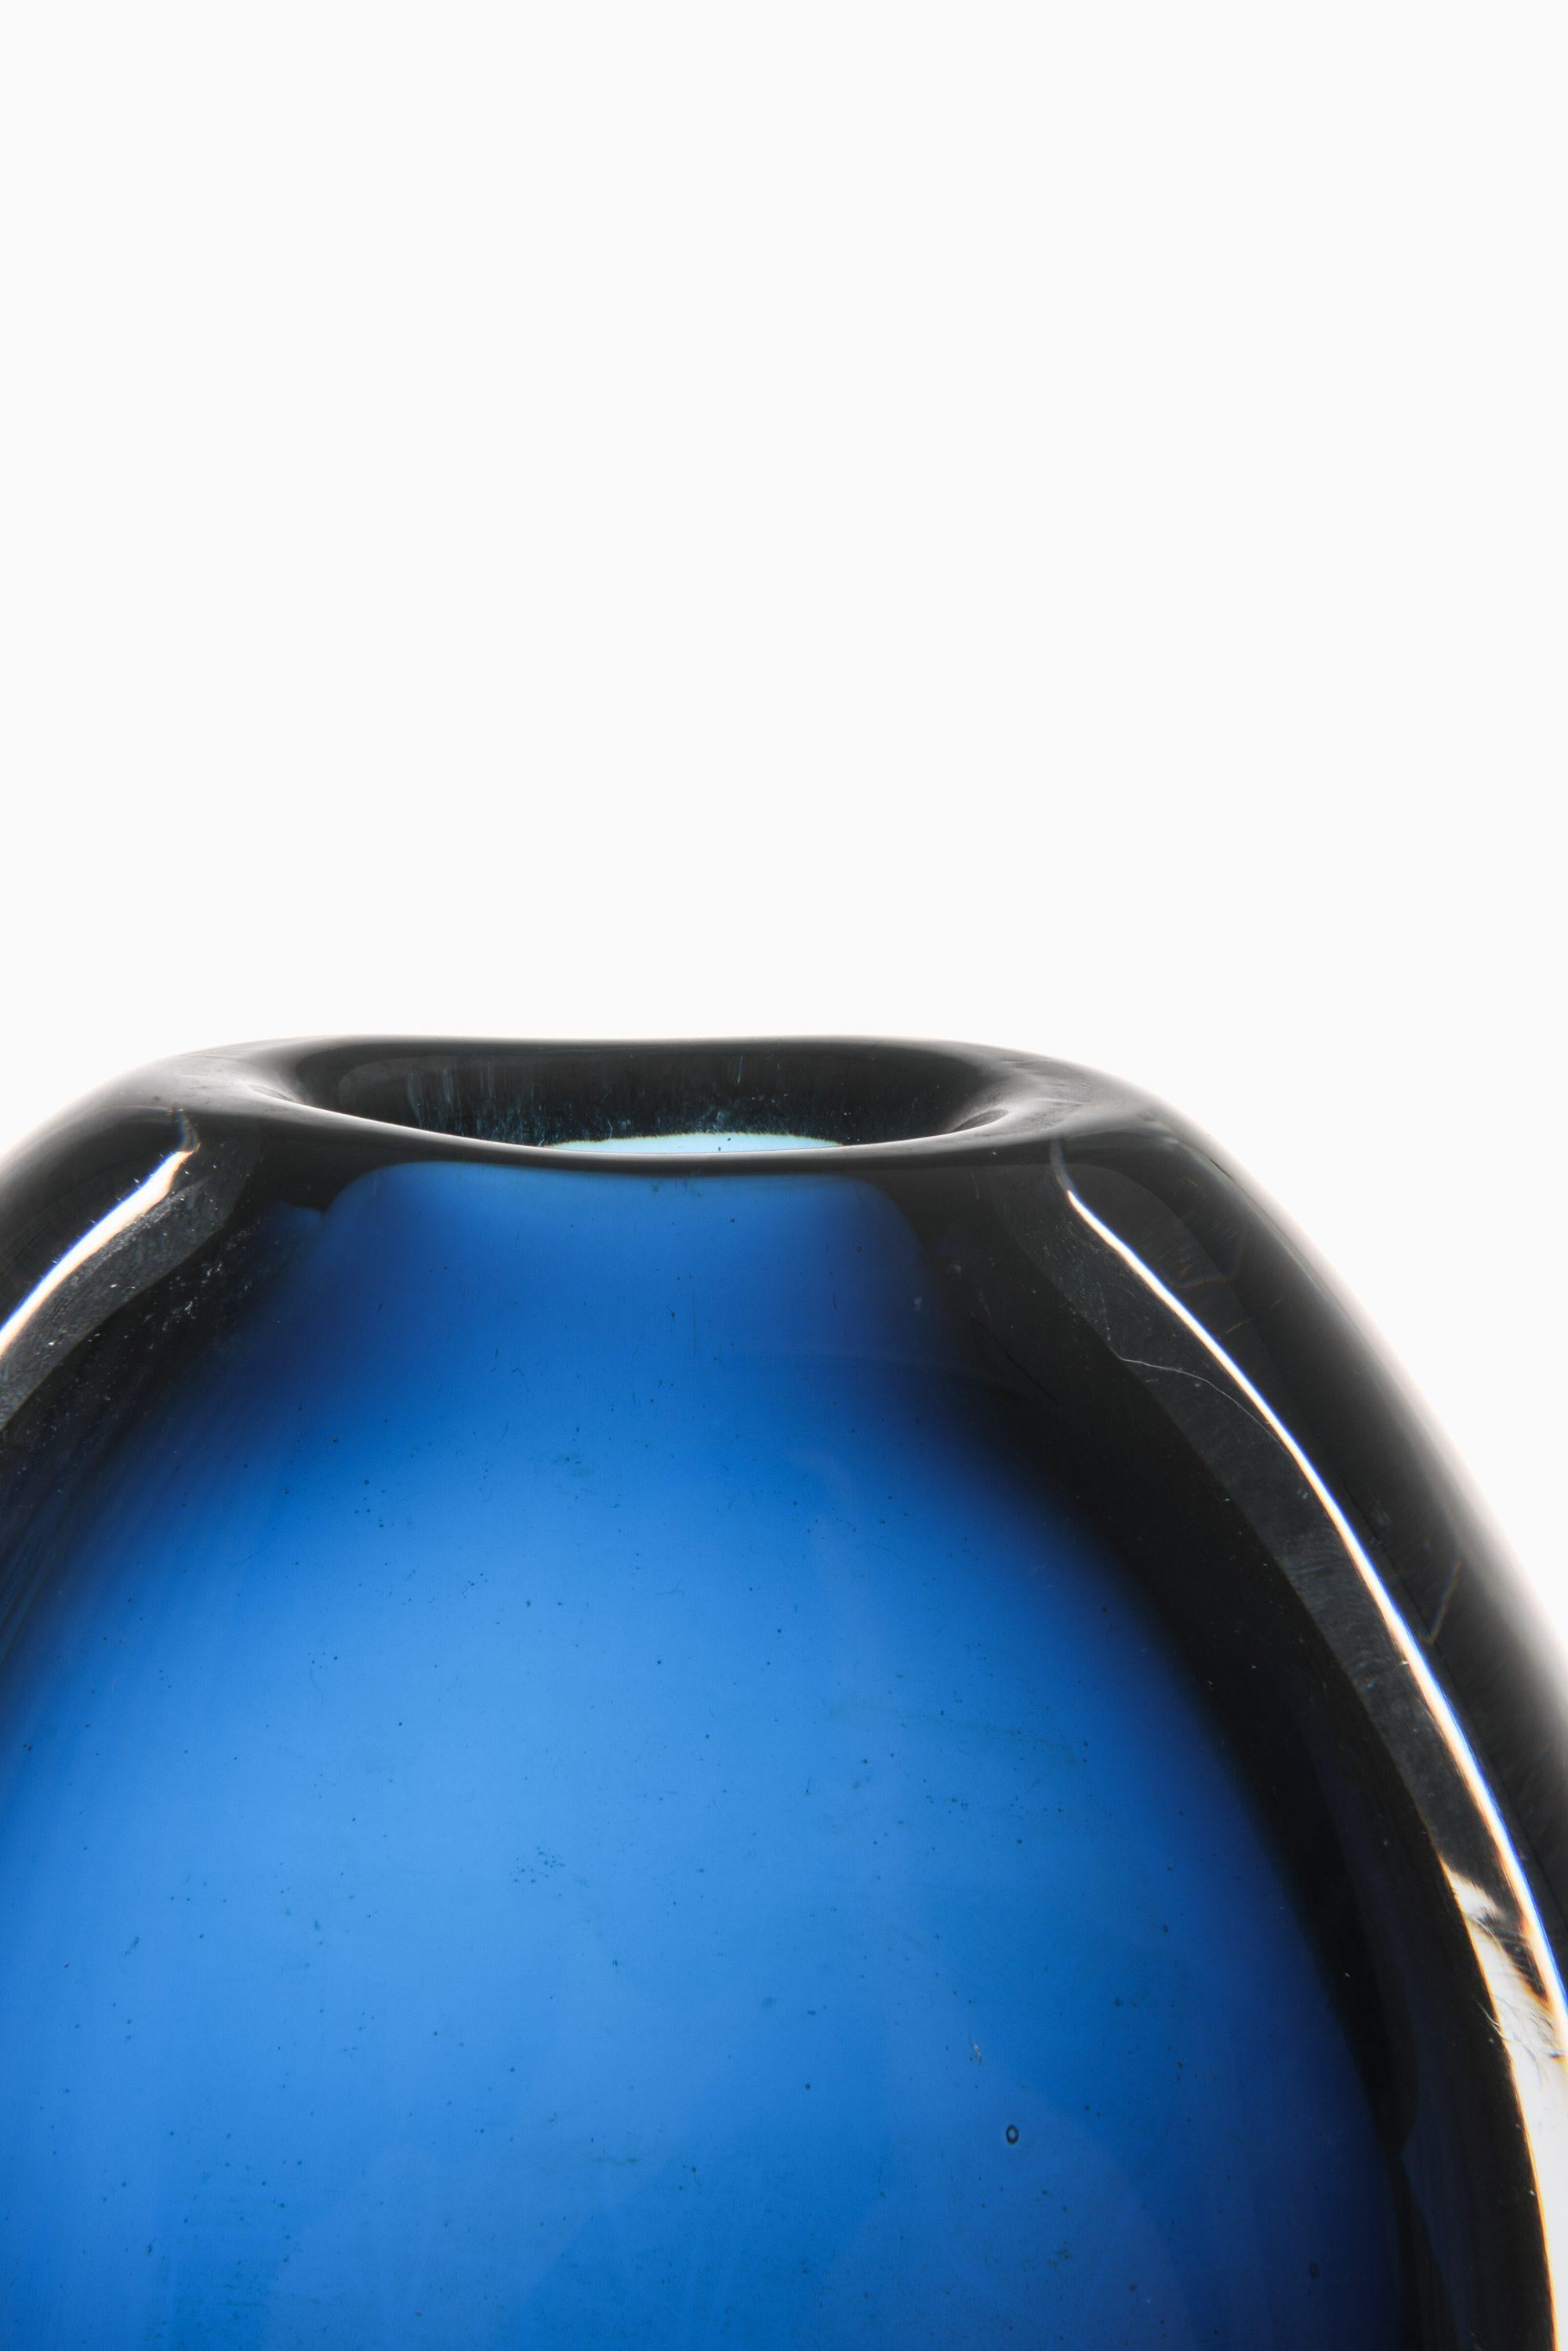 Round Glass Vase in Blue by Vicke Lindstrand, 1960's

Additional Information:
Material: Glass
Style: Mid century, Scandinavian
Produced by Kosta in Sweden
Signed LH 1825 Kosta
Dimensions (W x D x H): 13 x 8 x 15 cm
Condition: Good vintage condition,